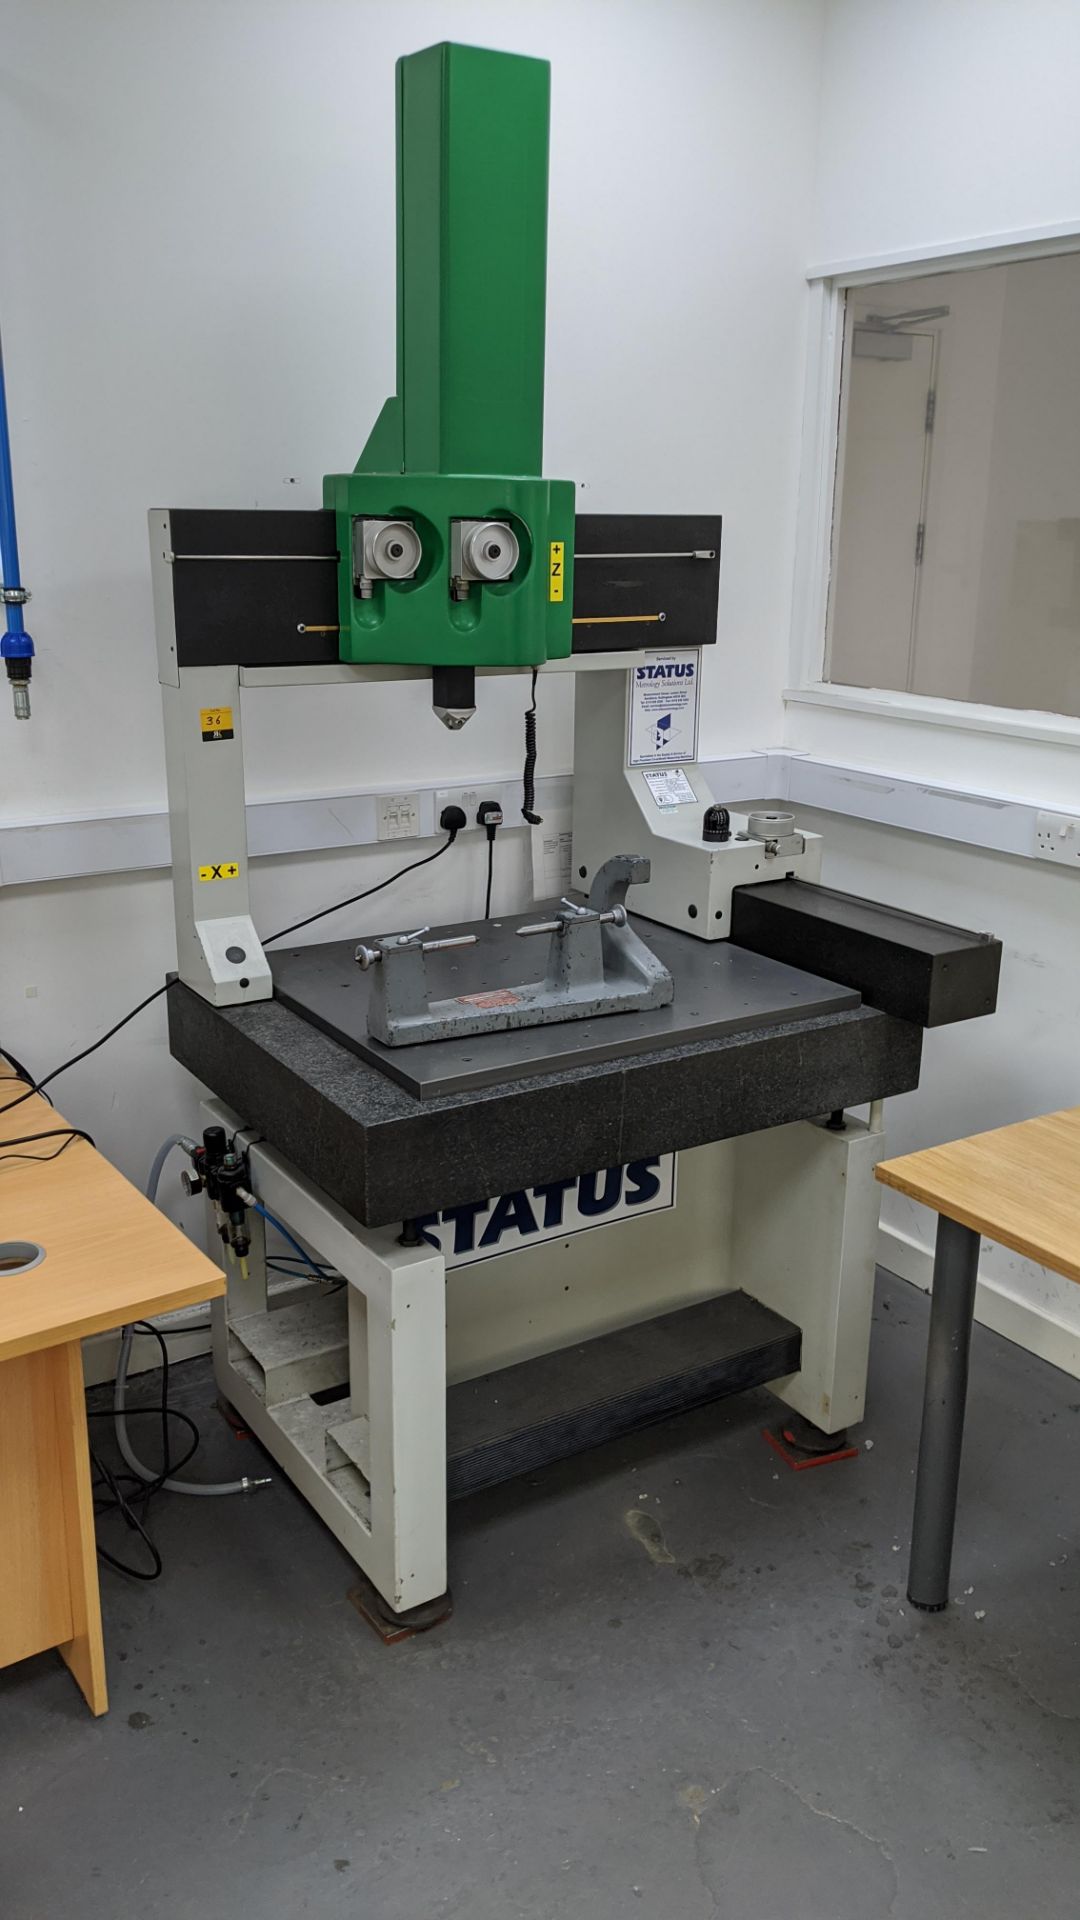 Coord 3 CMM on table measuring approx. 900mm x 780mm, including plate & bench centre as pictured. We